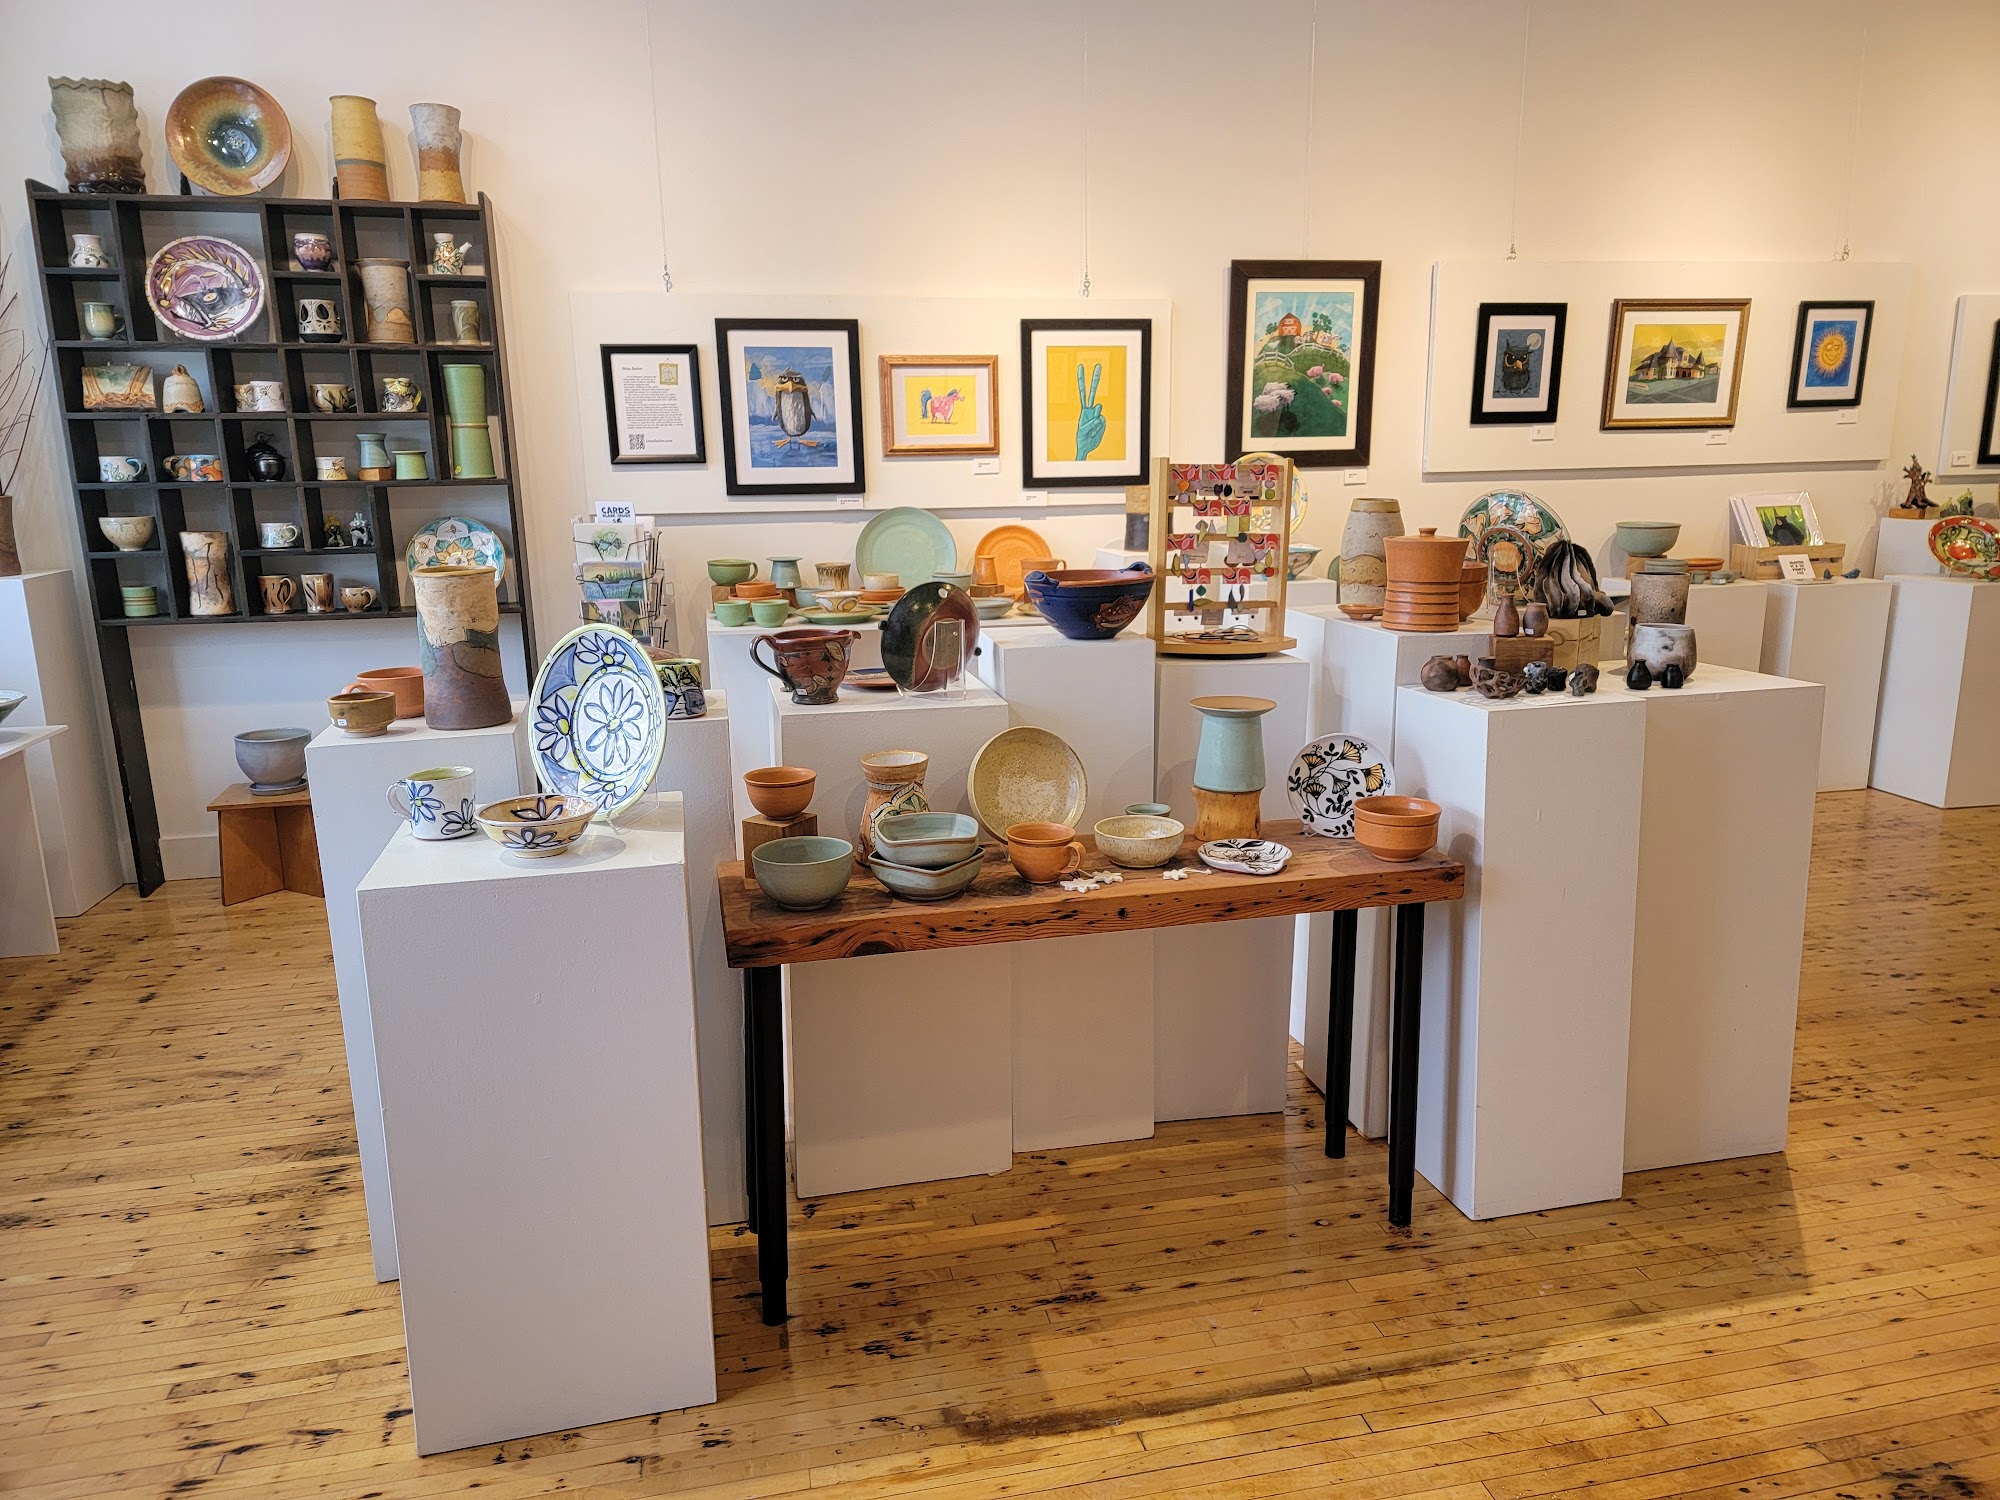 Duluth Pottery Tile & Gallery